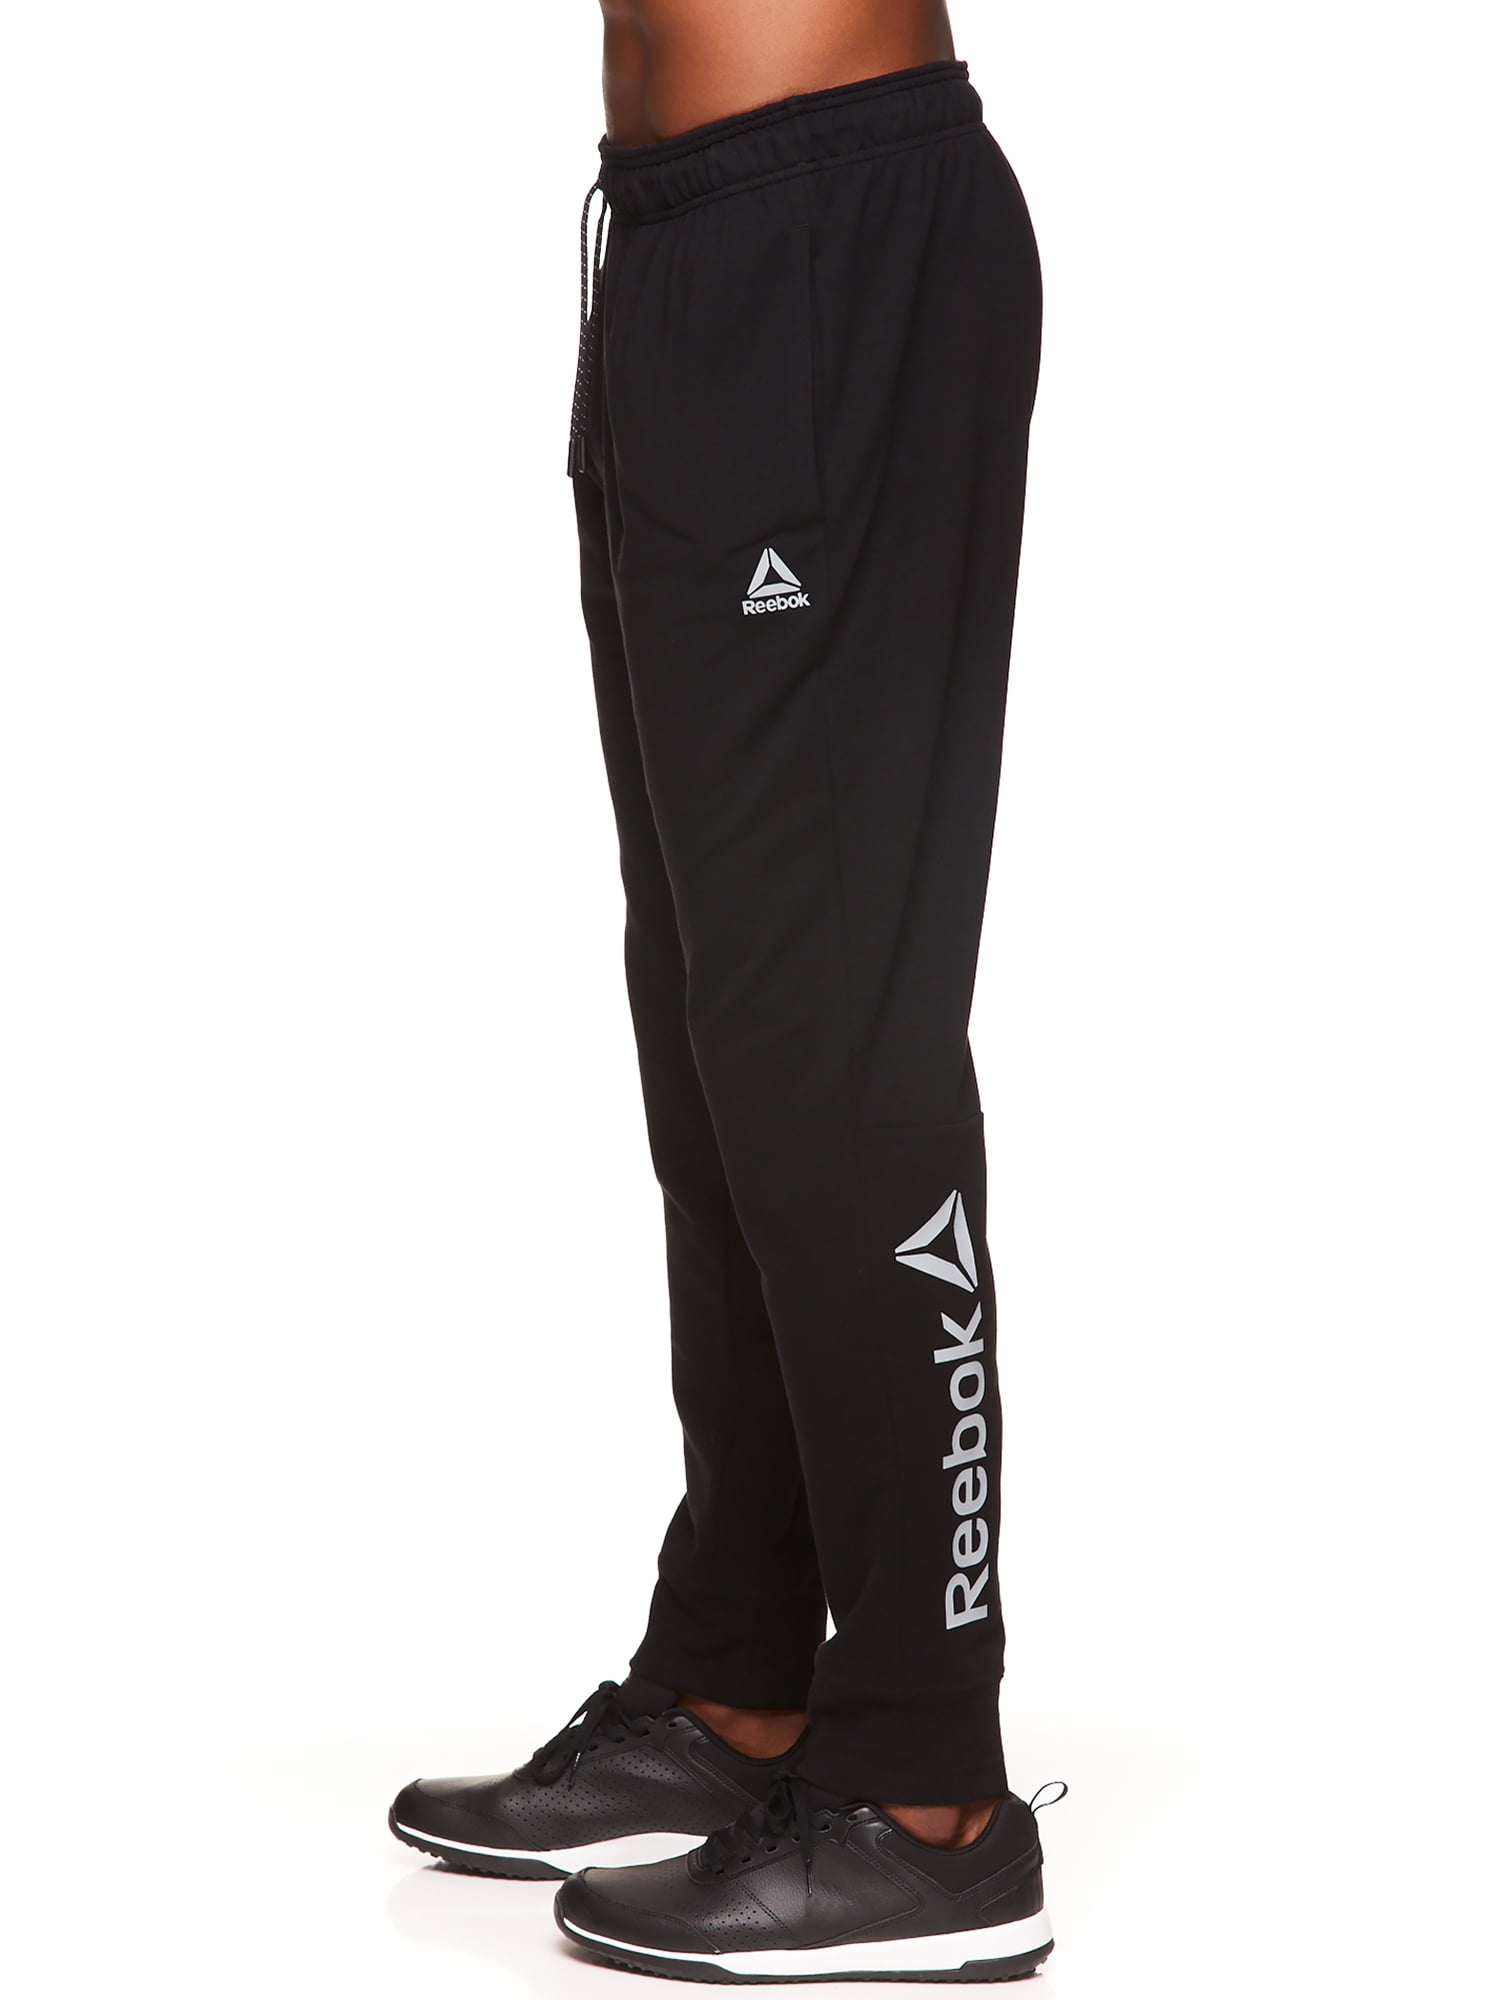 Reebok Men's and Big Men's Active Tech Terry Pants, up to Size